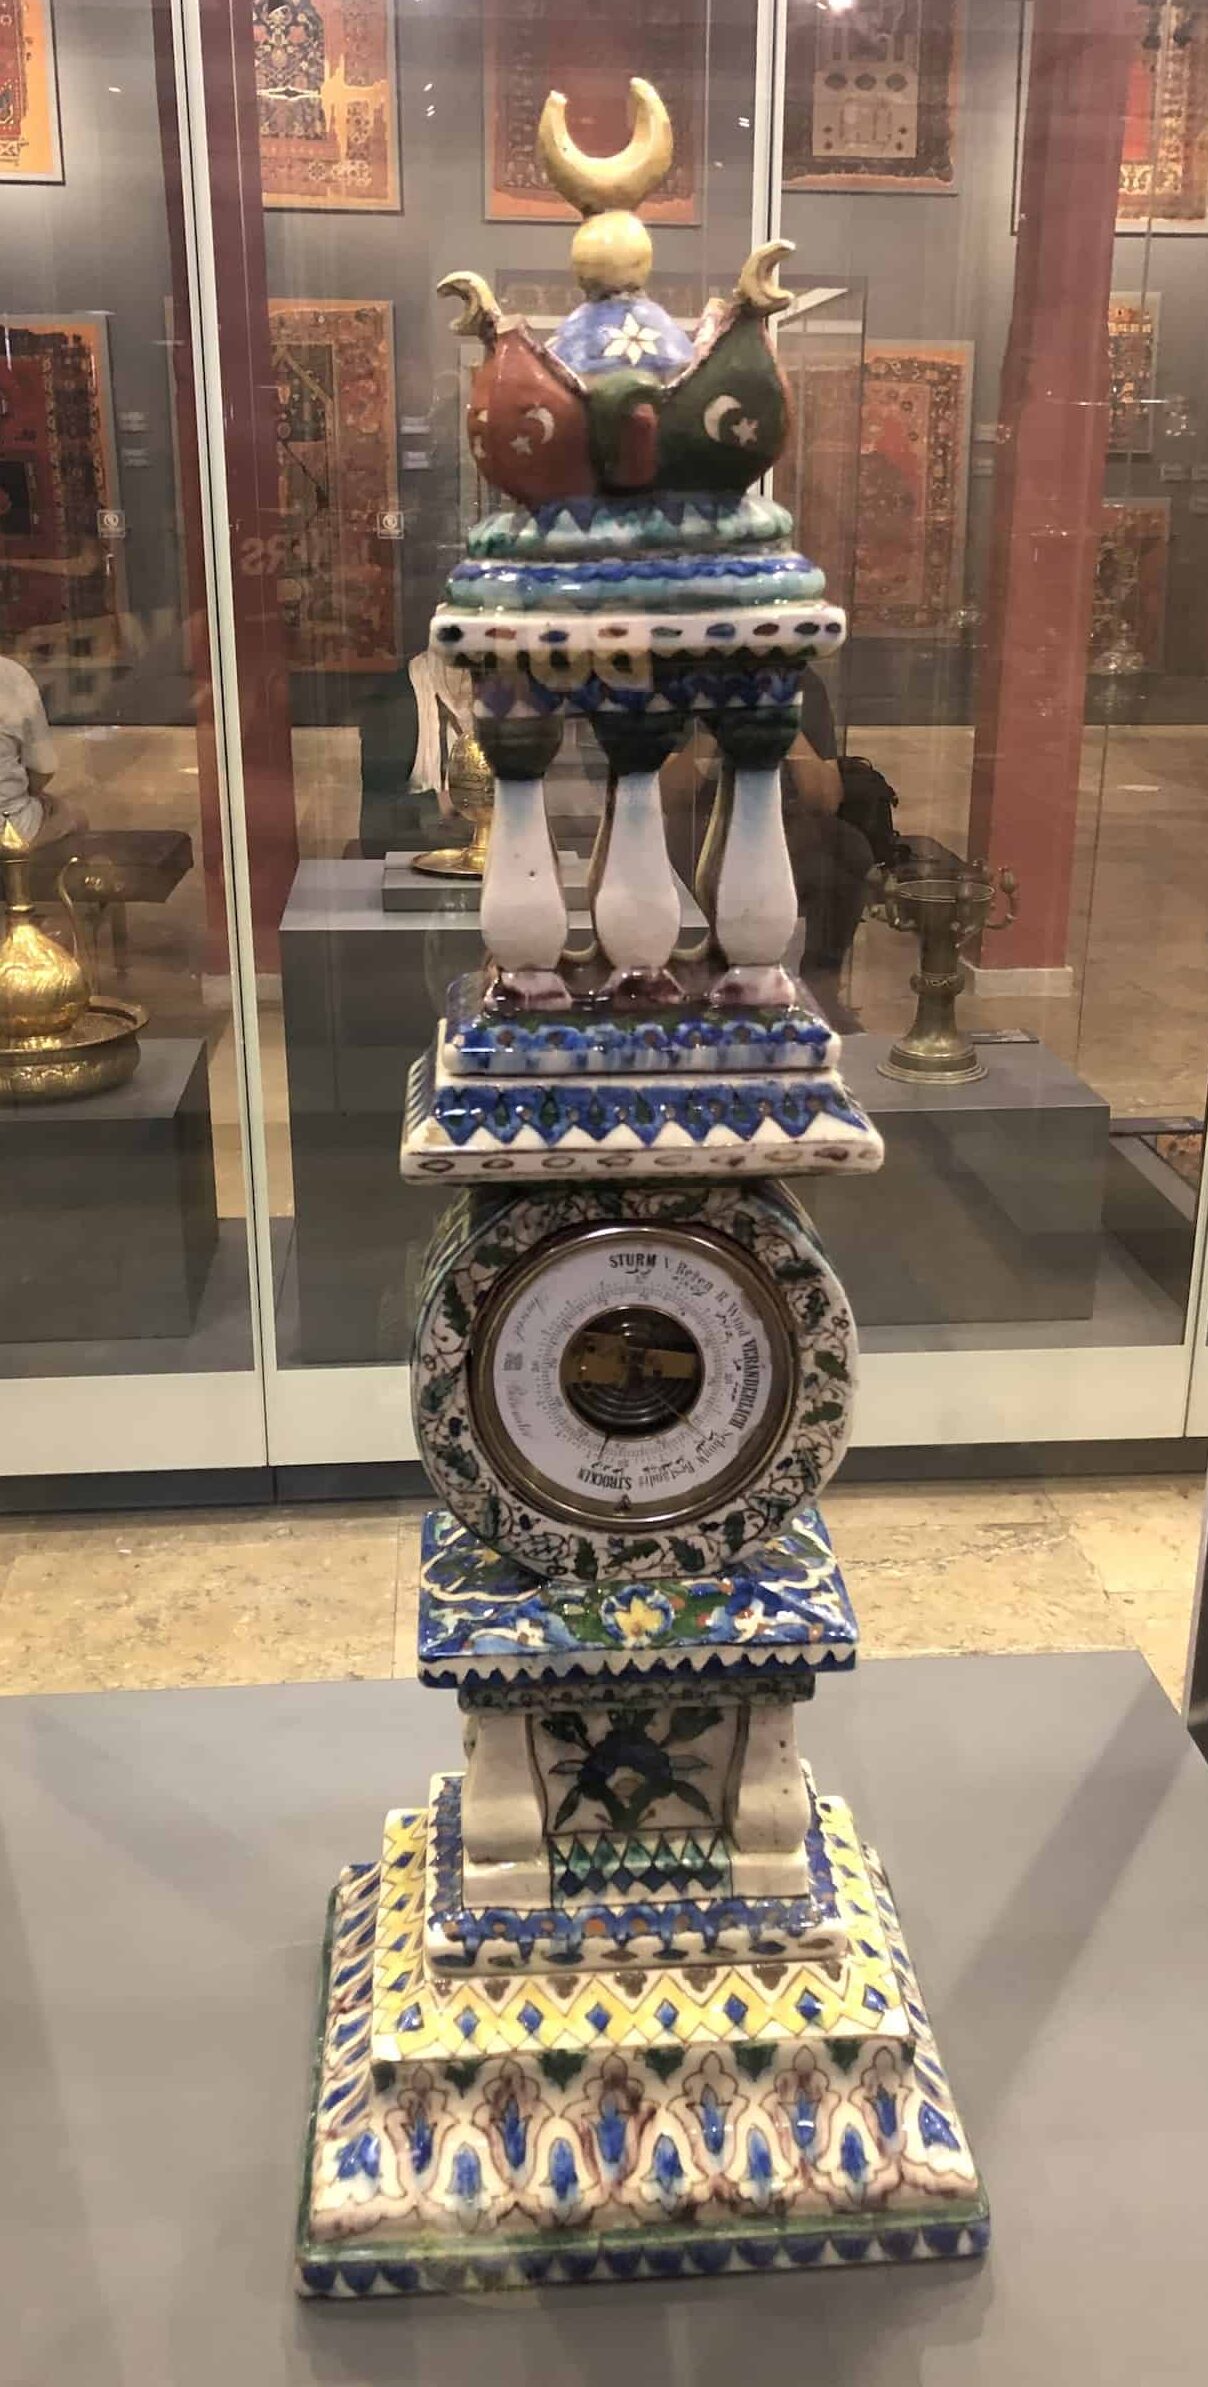 19th century barometer in the Ottoman Period at the Museum of Turkish and Islamic Arts in Istanbul, Turkey